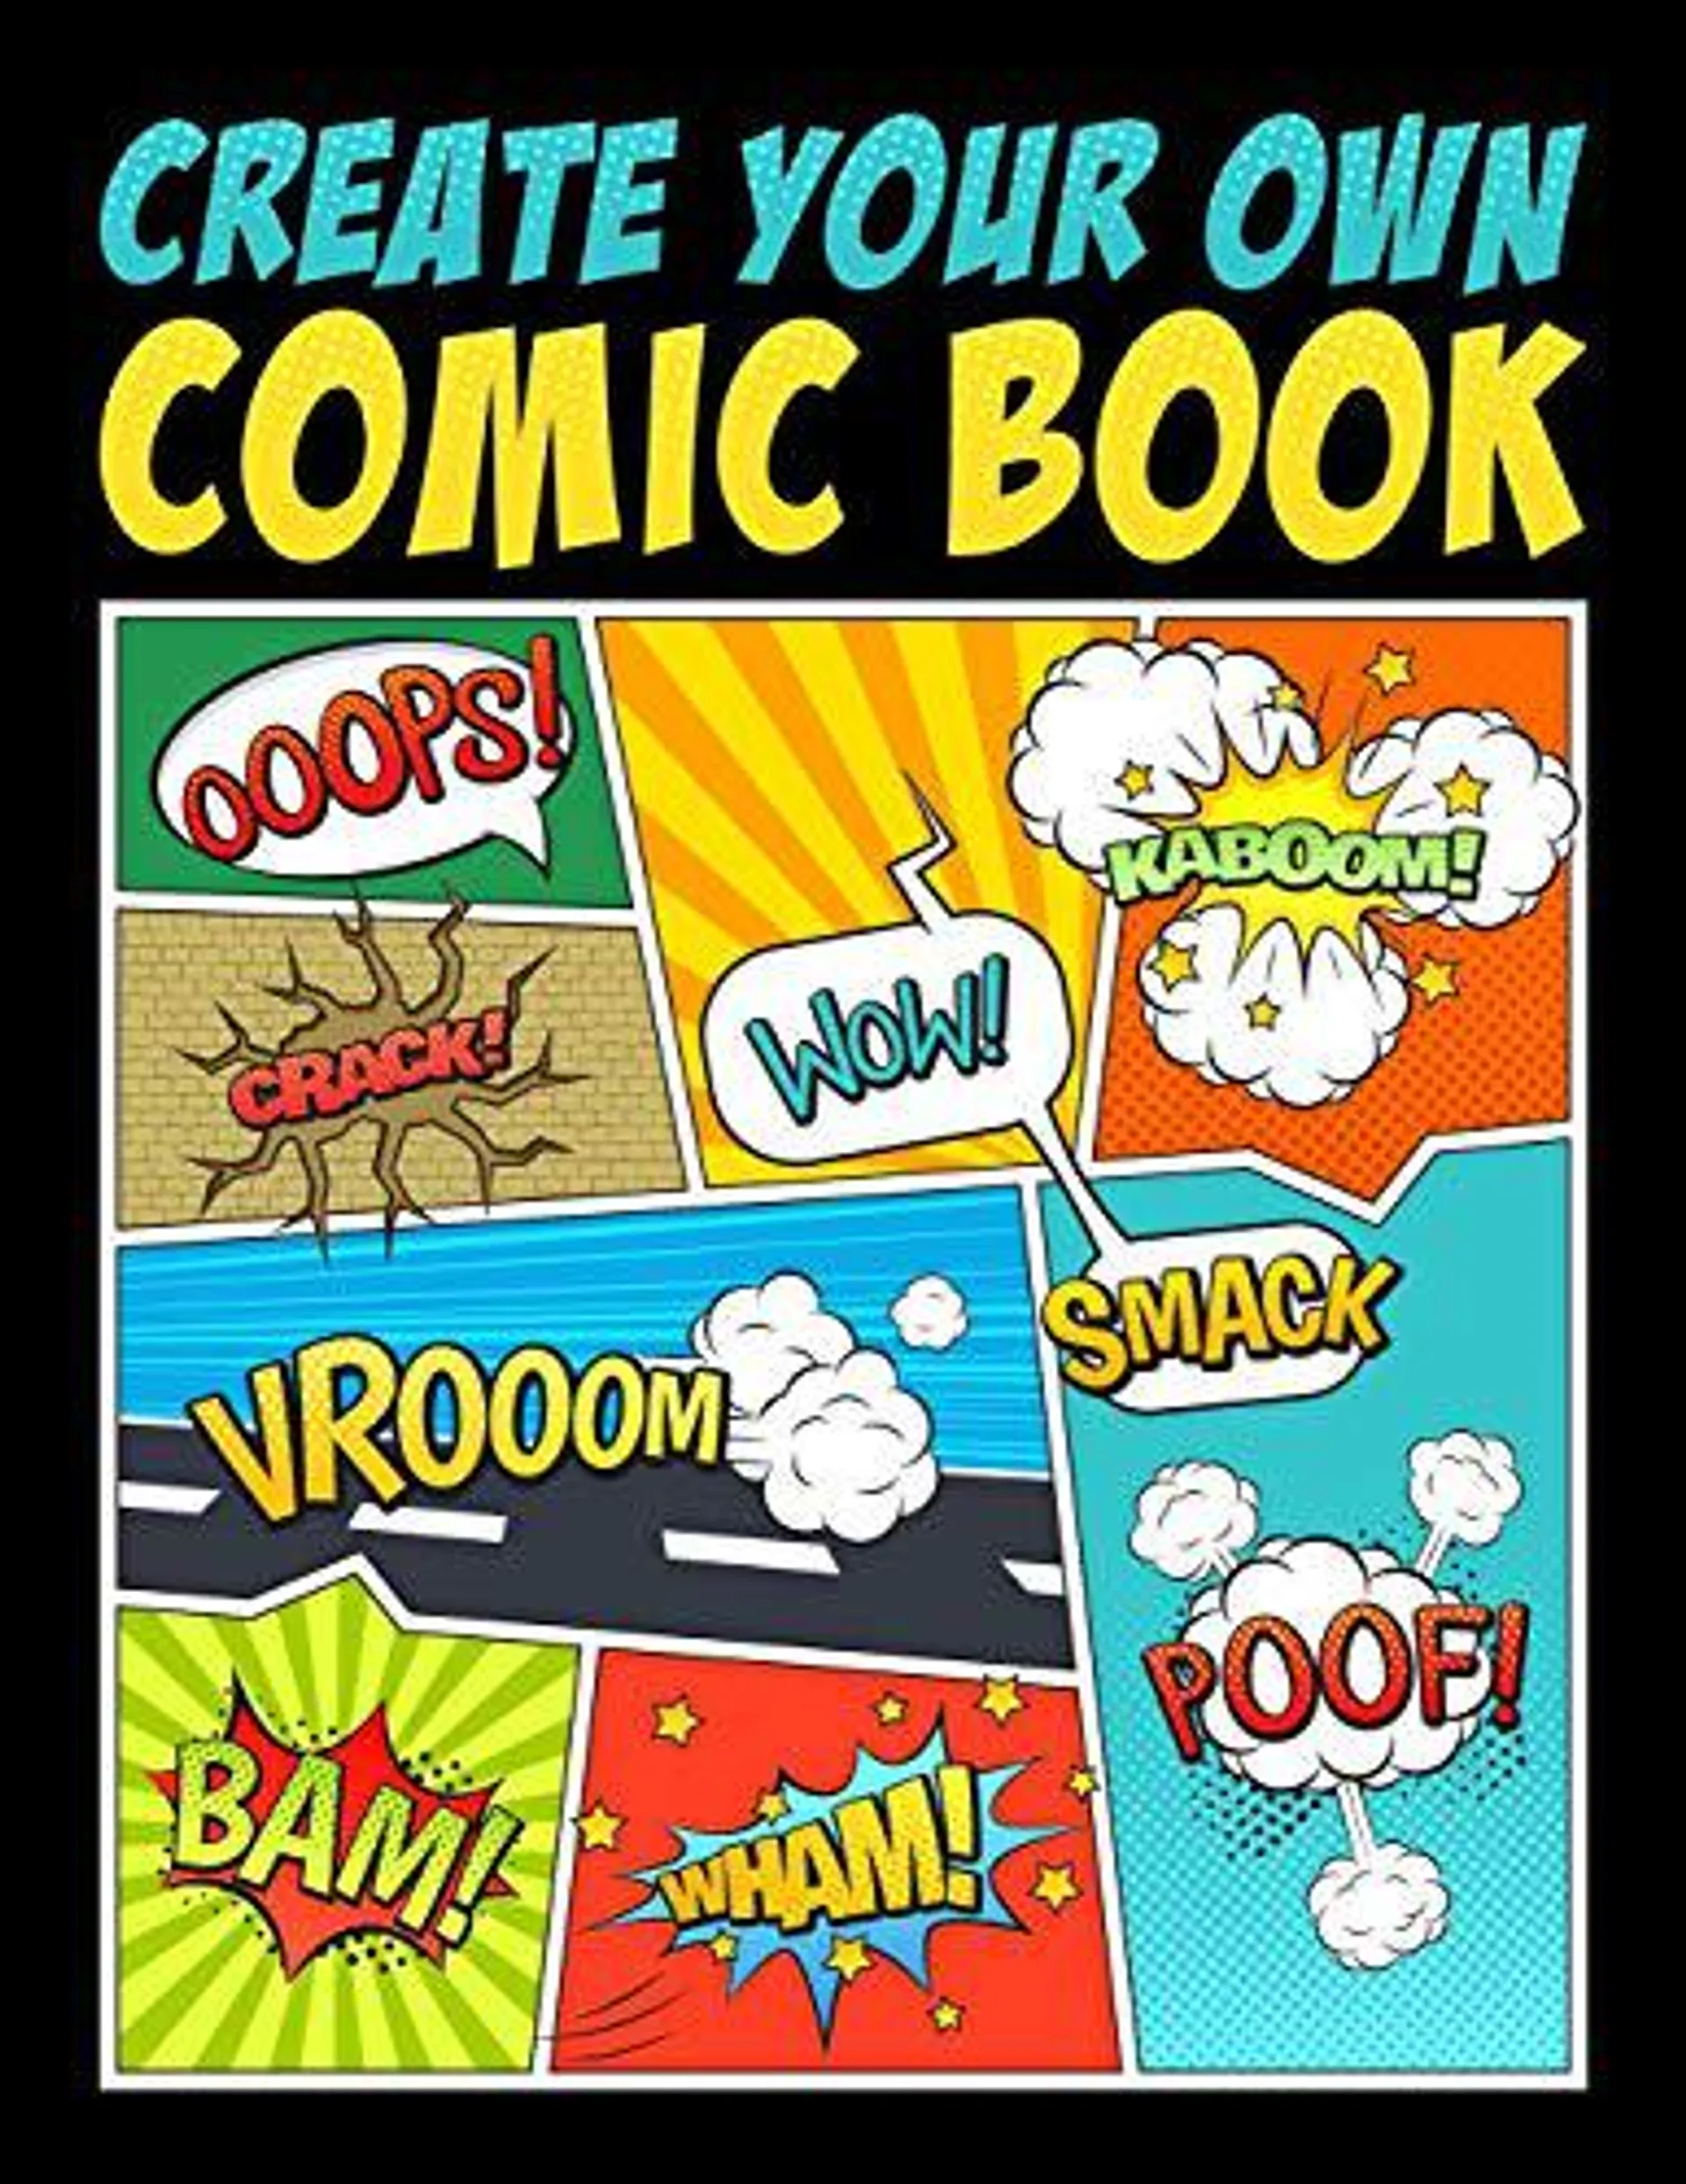 Create Your Own Comic Book by Papeterie Bleu